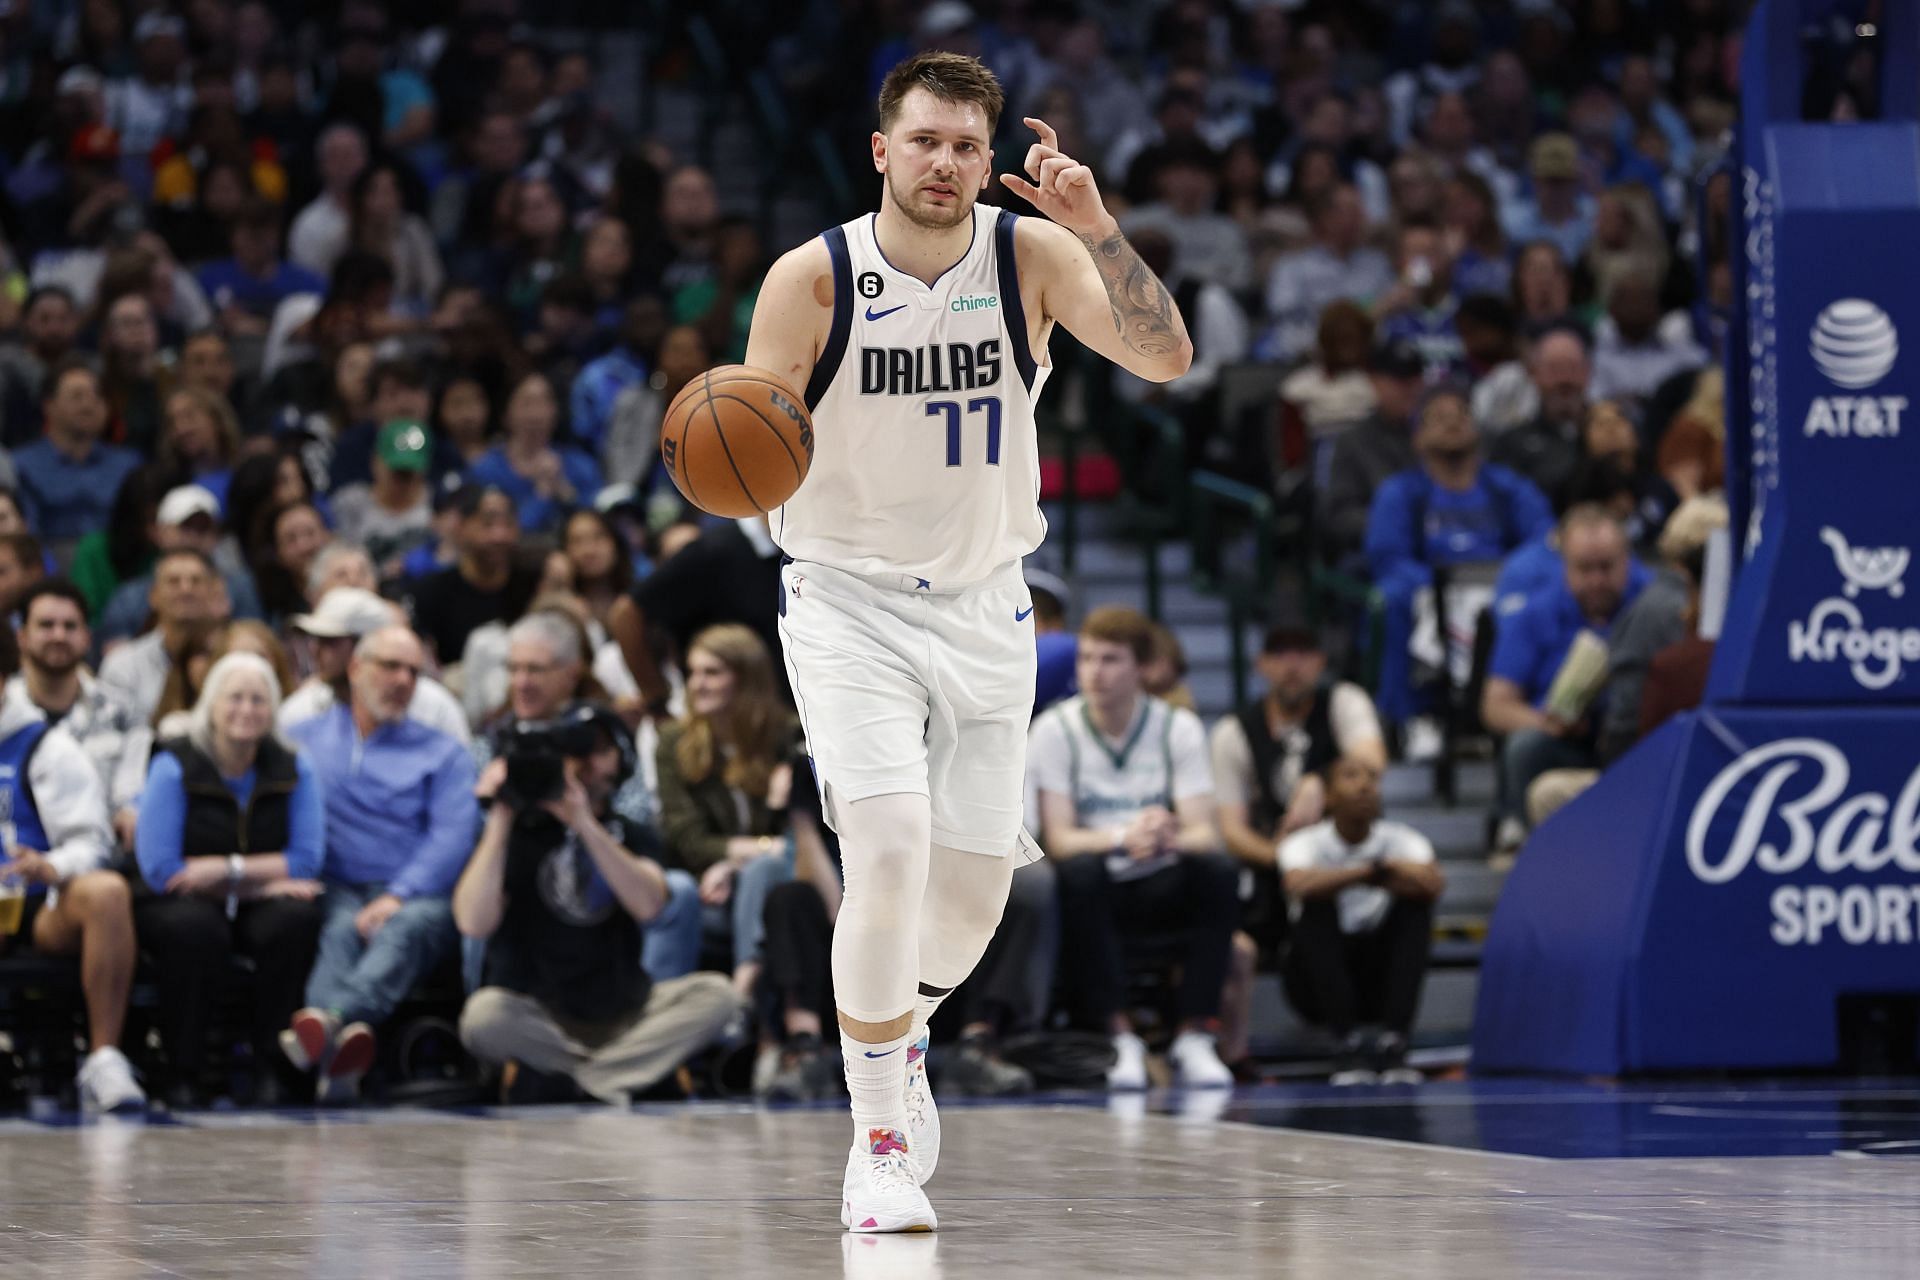 Luka Doncic's Jersey: What Does Enakopravnost Mean?